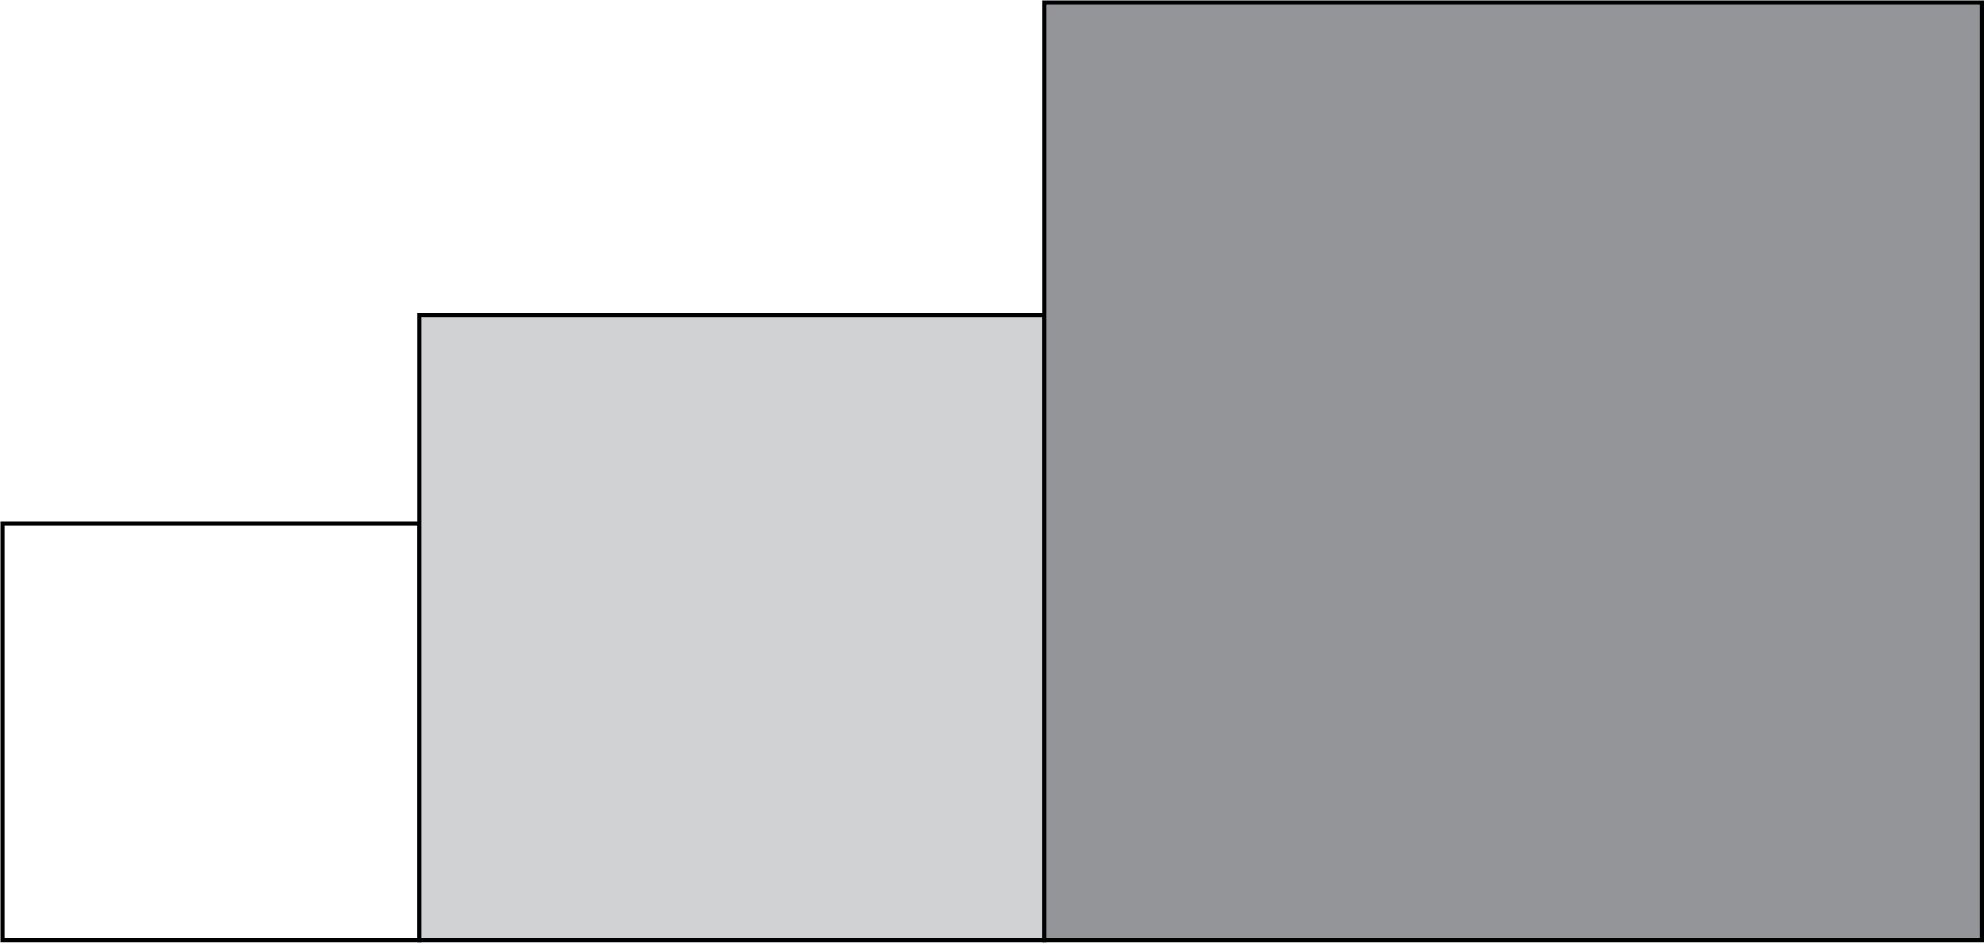 Three squares of different sizes all share a vertex A as
follows. The largest square AHJK has point B on side AH, point D on
adjacent side AK, and point C in its interior forming the smallest
square ABCD. It also has point E on side AH (between B and H), point G
on side AK (between D and K), and point F in its integer forming the
middle square AEFG. The L-shaped region inside the middle square that is
not covered by the smallest square is shaded.